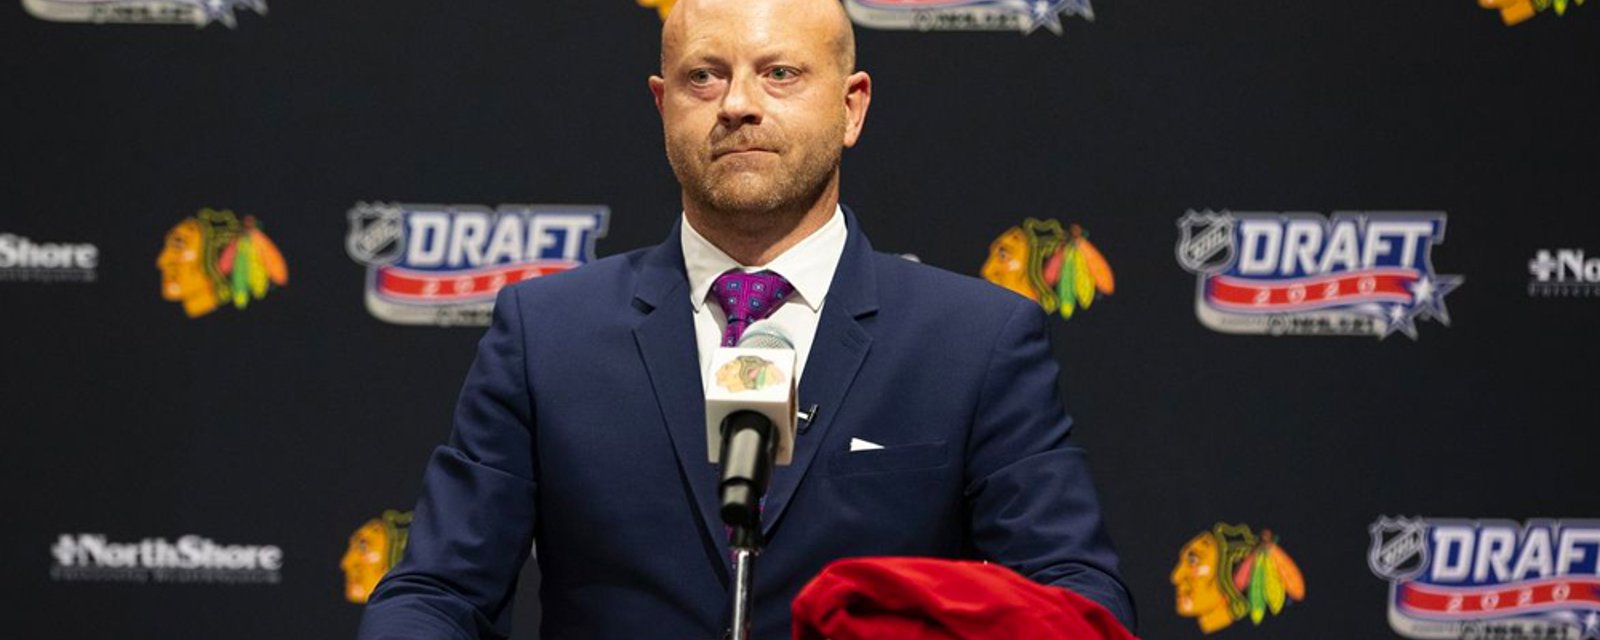 Stan Bowman gives first public comments on pending charges against Blackhawks